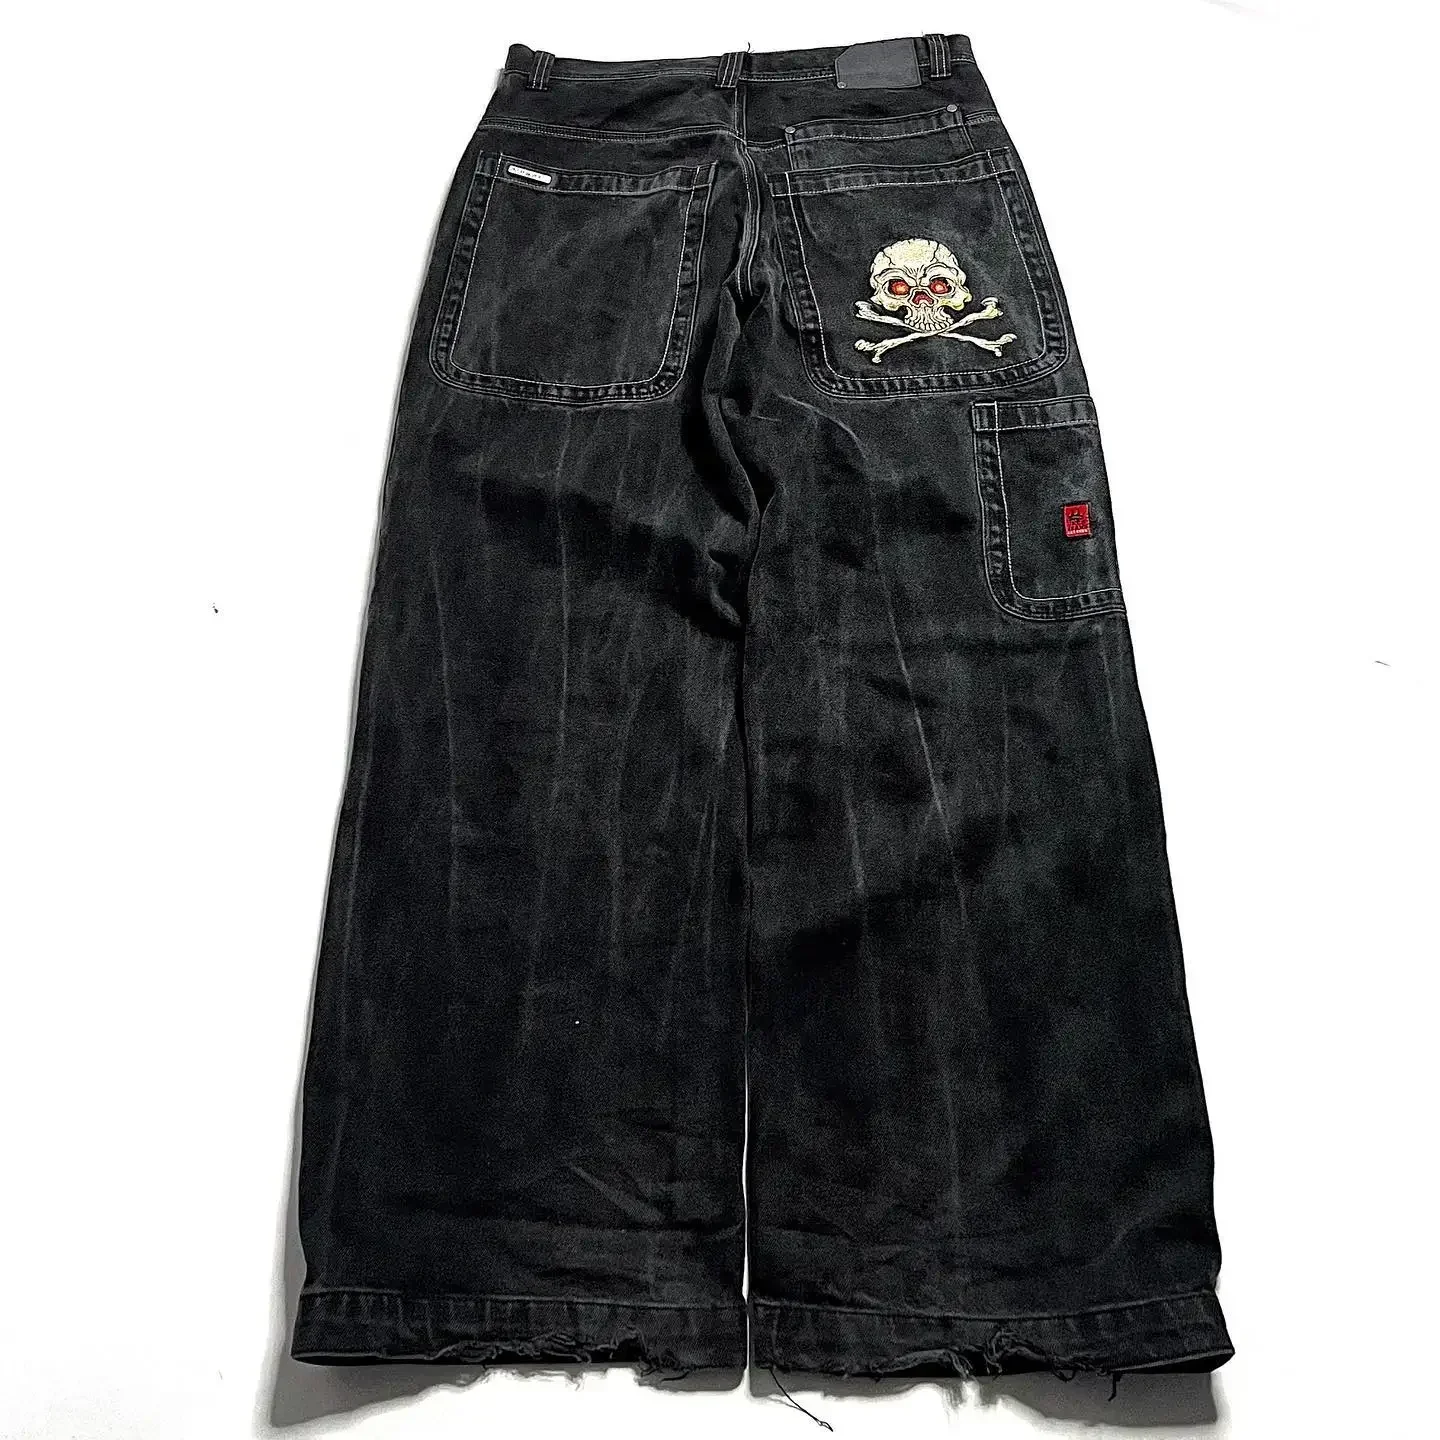 

Retro Skull Graphic Embroidered JNCO Jeans New Harajuku Hip Hop Baggy Jeans Denim Pants Men Women Goth High Waist Wide Trousers